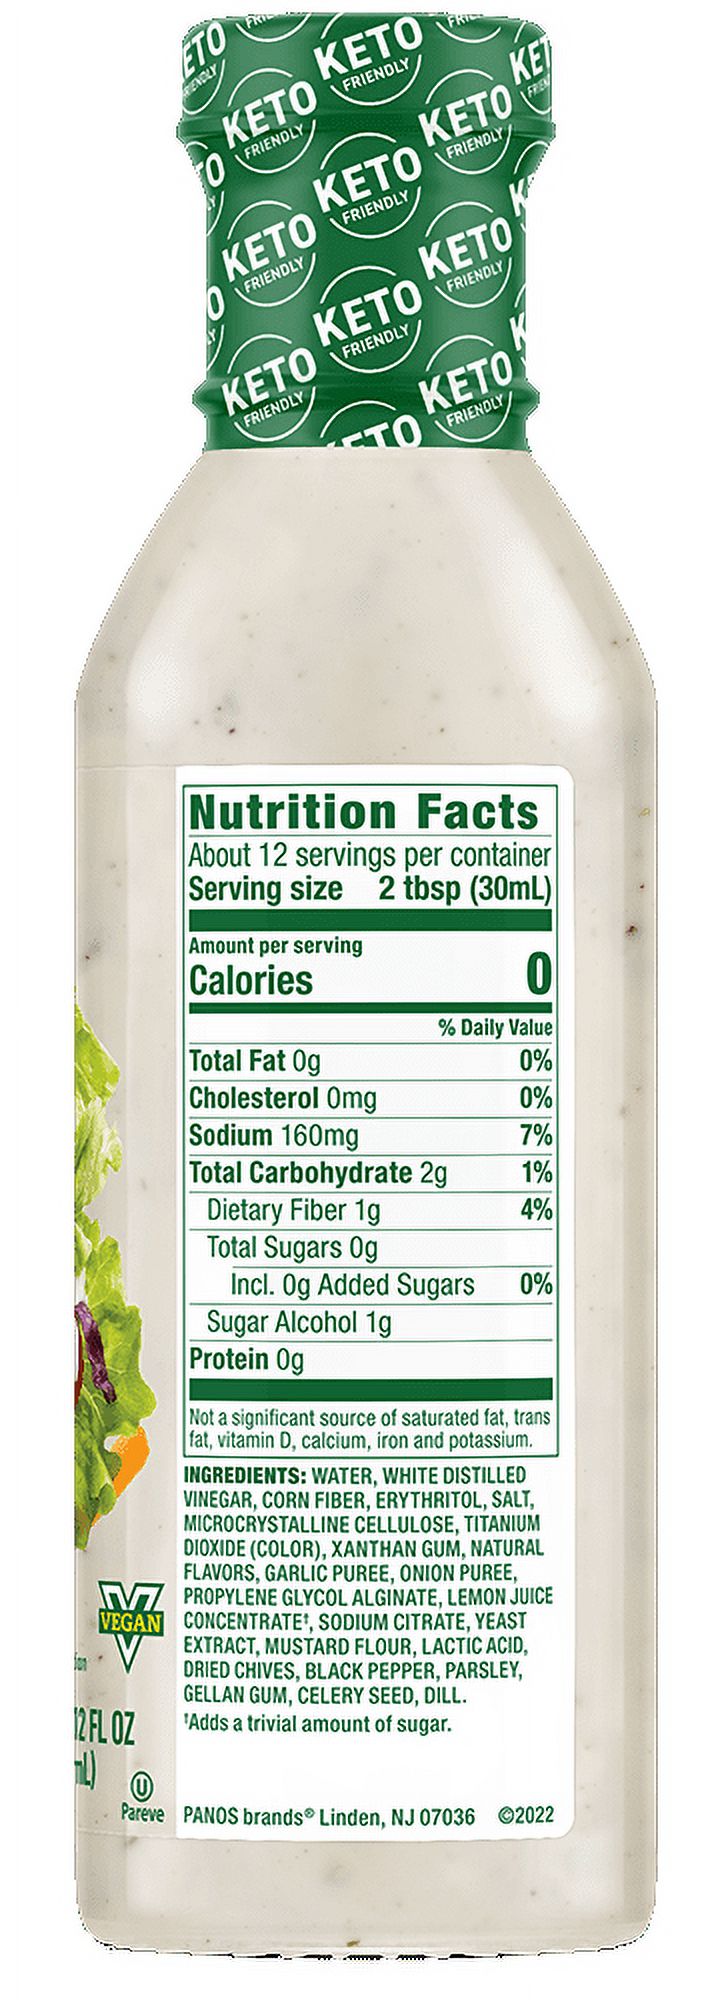 Walden Farms Ranch Dressing, 12 oz. Bottle, Fresh and Delicious Salad Topping, Sugar Free 0g Net Carbs Condiment, Cool and Tangy - image 2 of 7